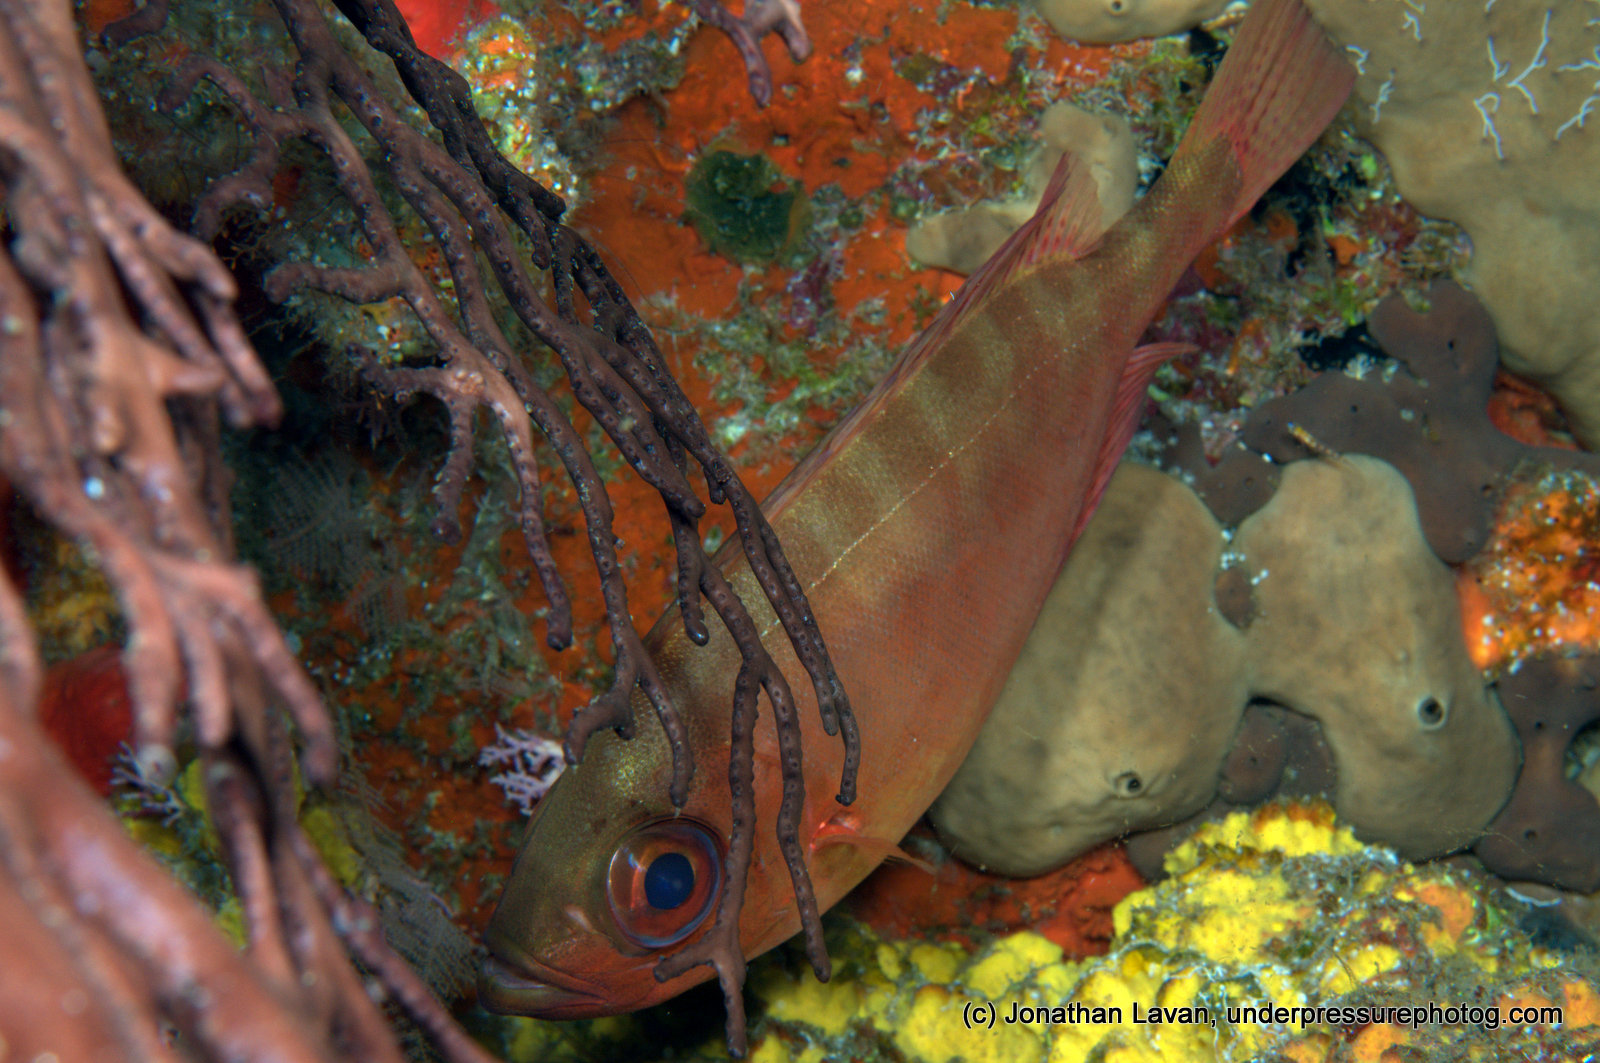 Caribbean Creature Feature: The Glasseye Snapper